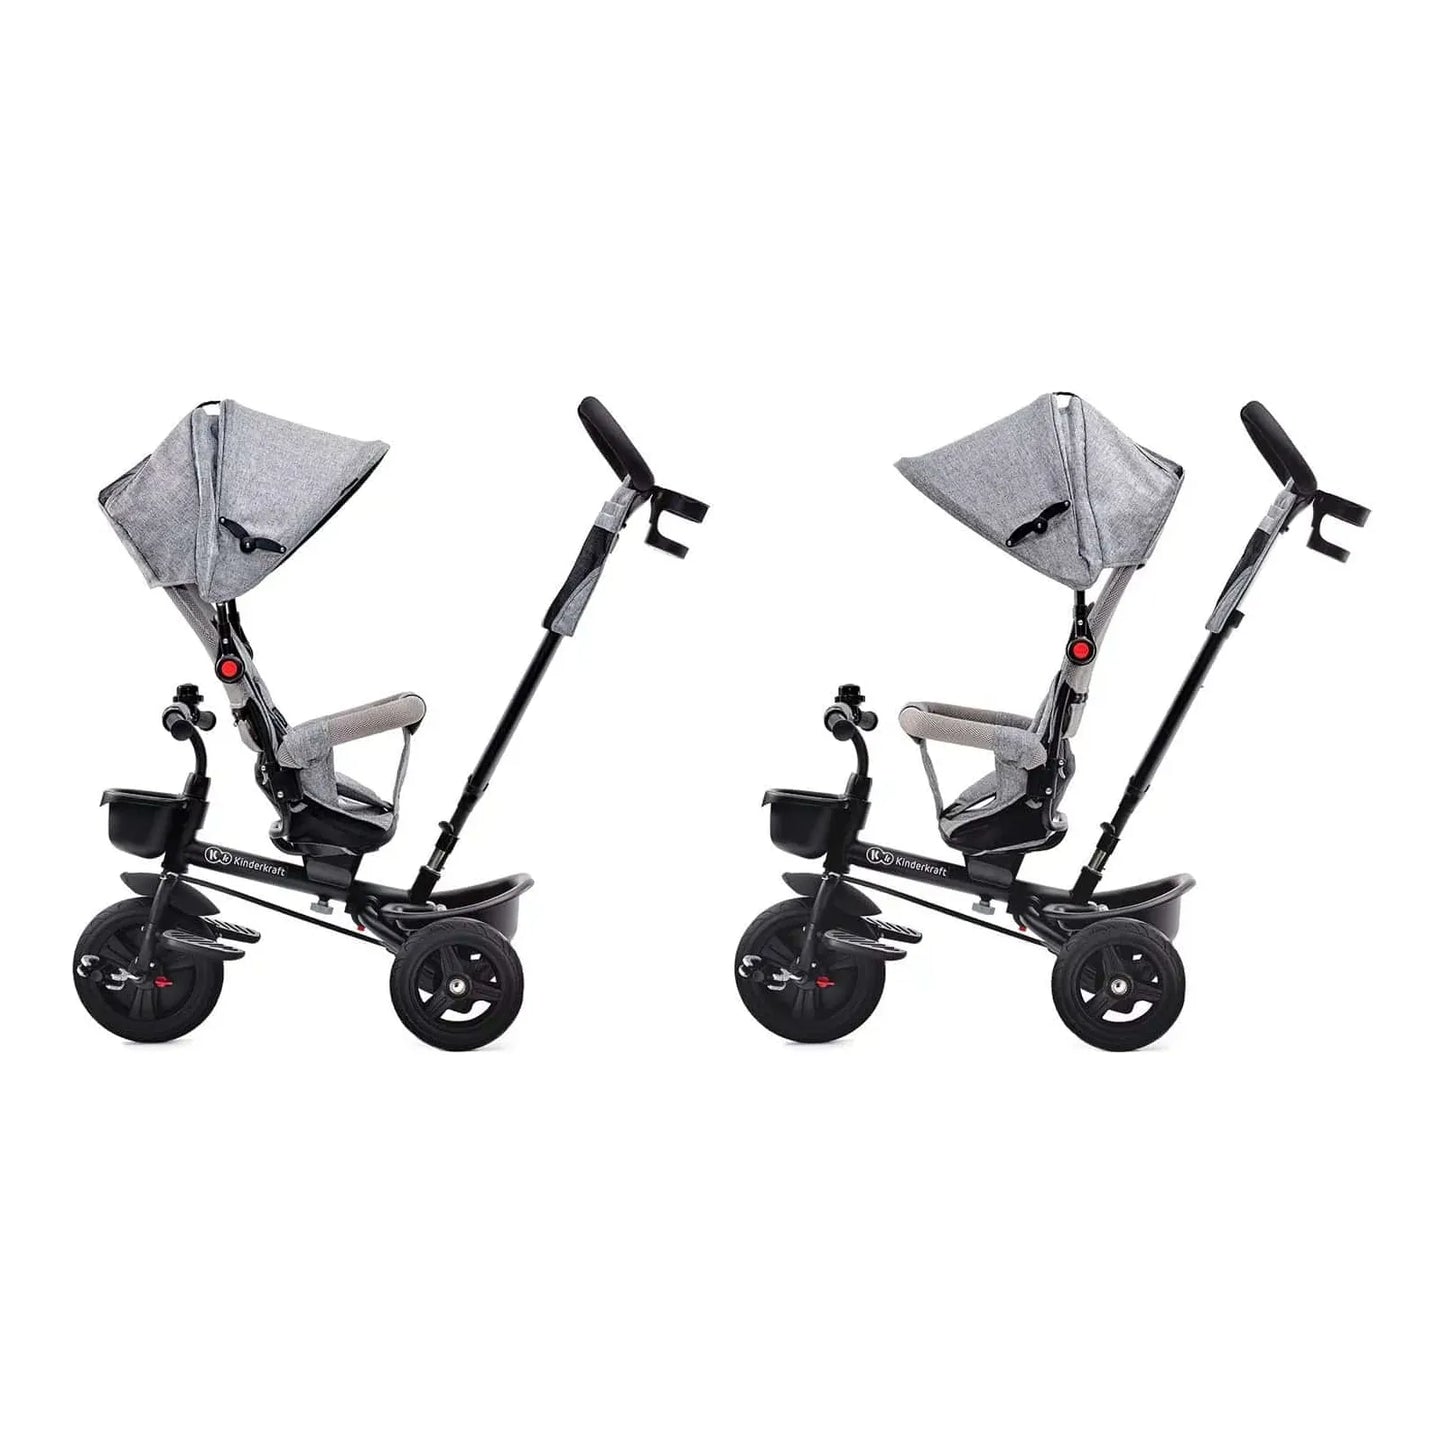 2 Kinderkraft Aveo Tricycle - Grey, one with front and rear facing seats